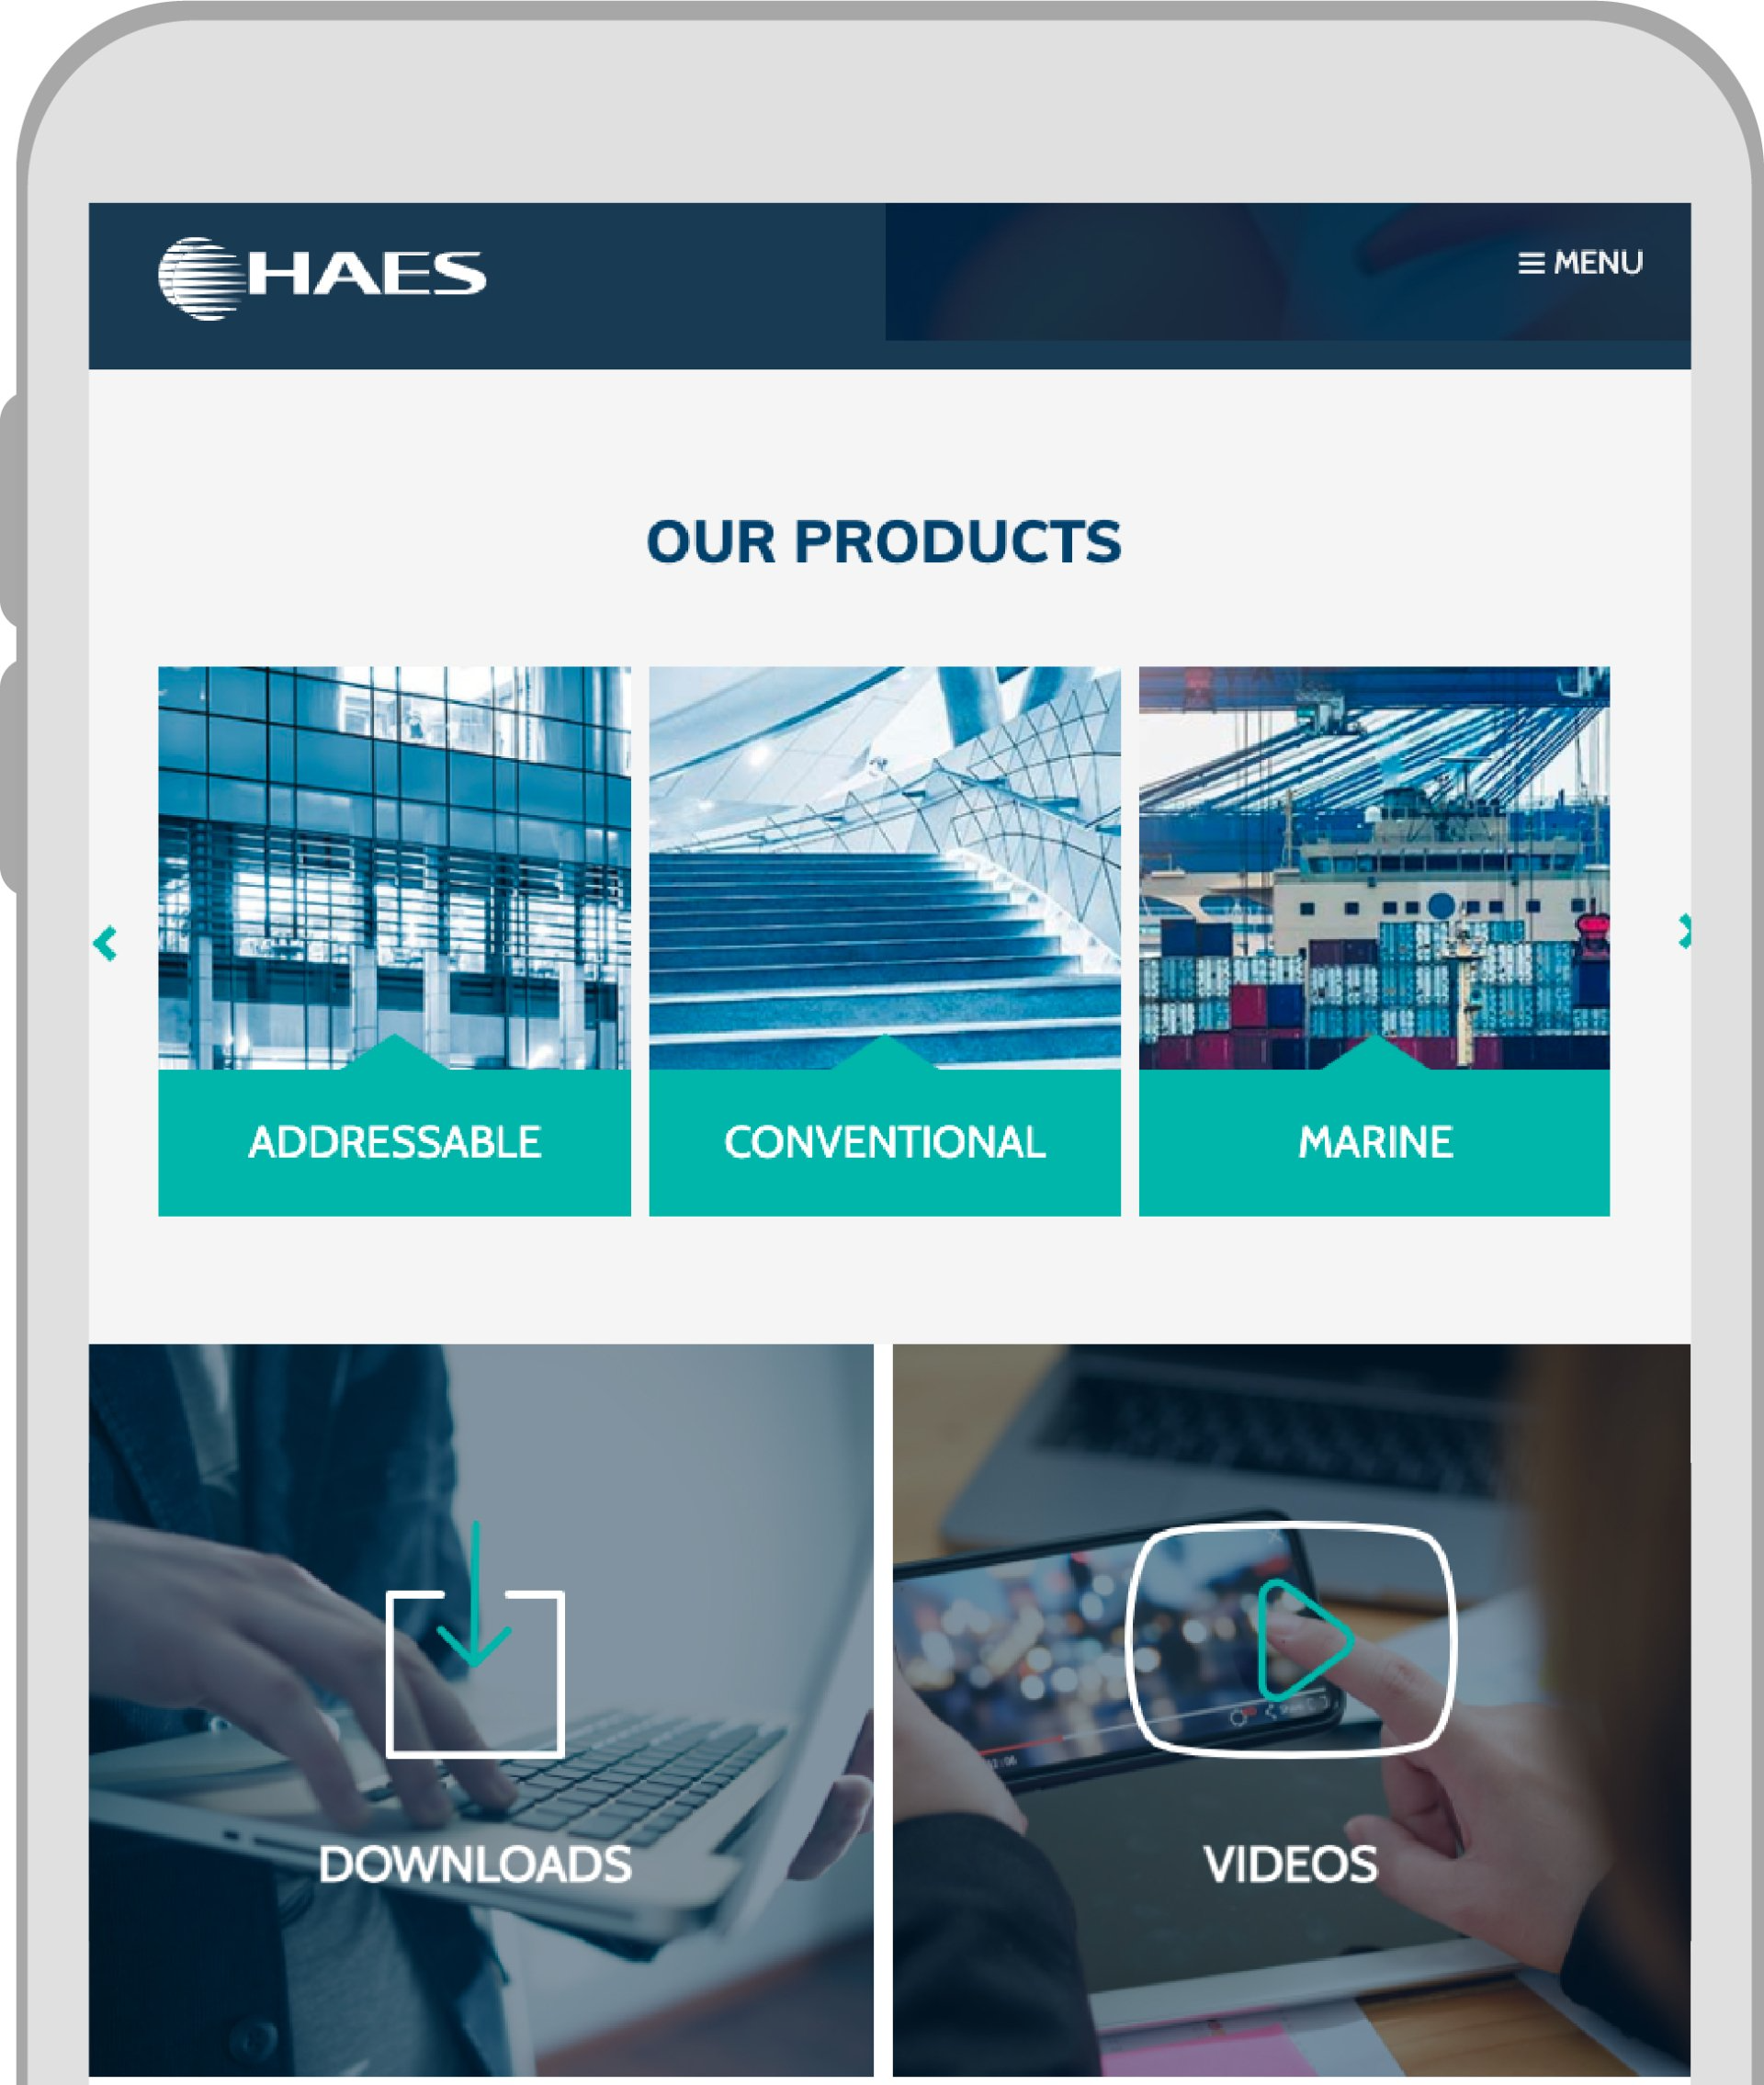 a tablet screen shows a website for a company called haes